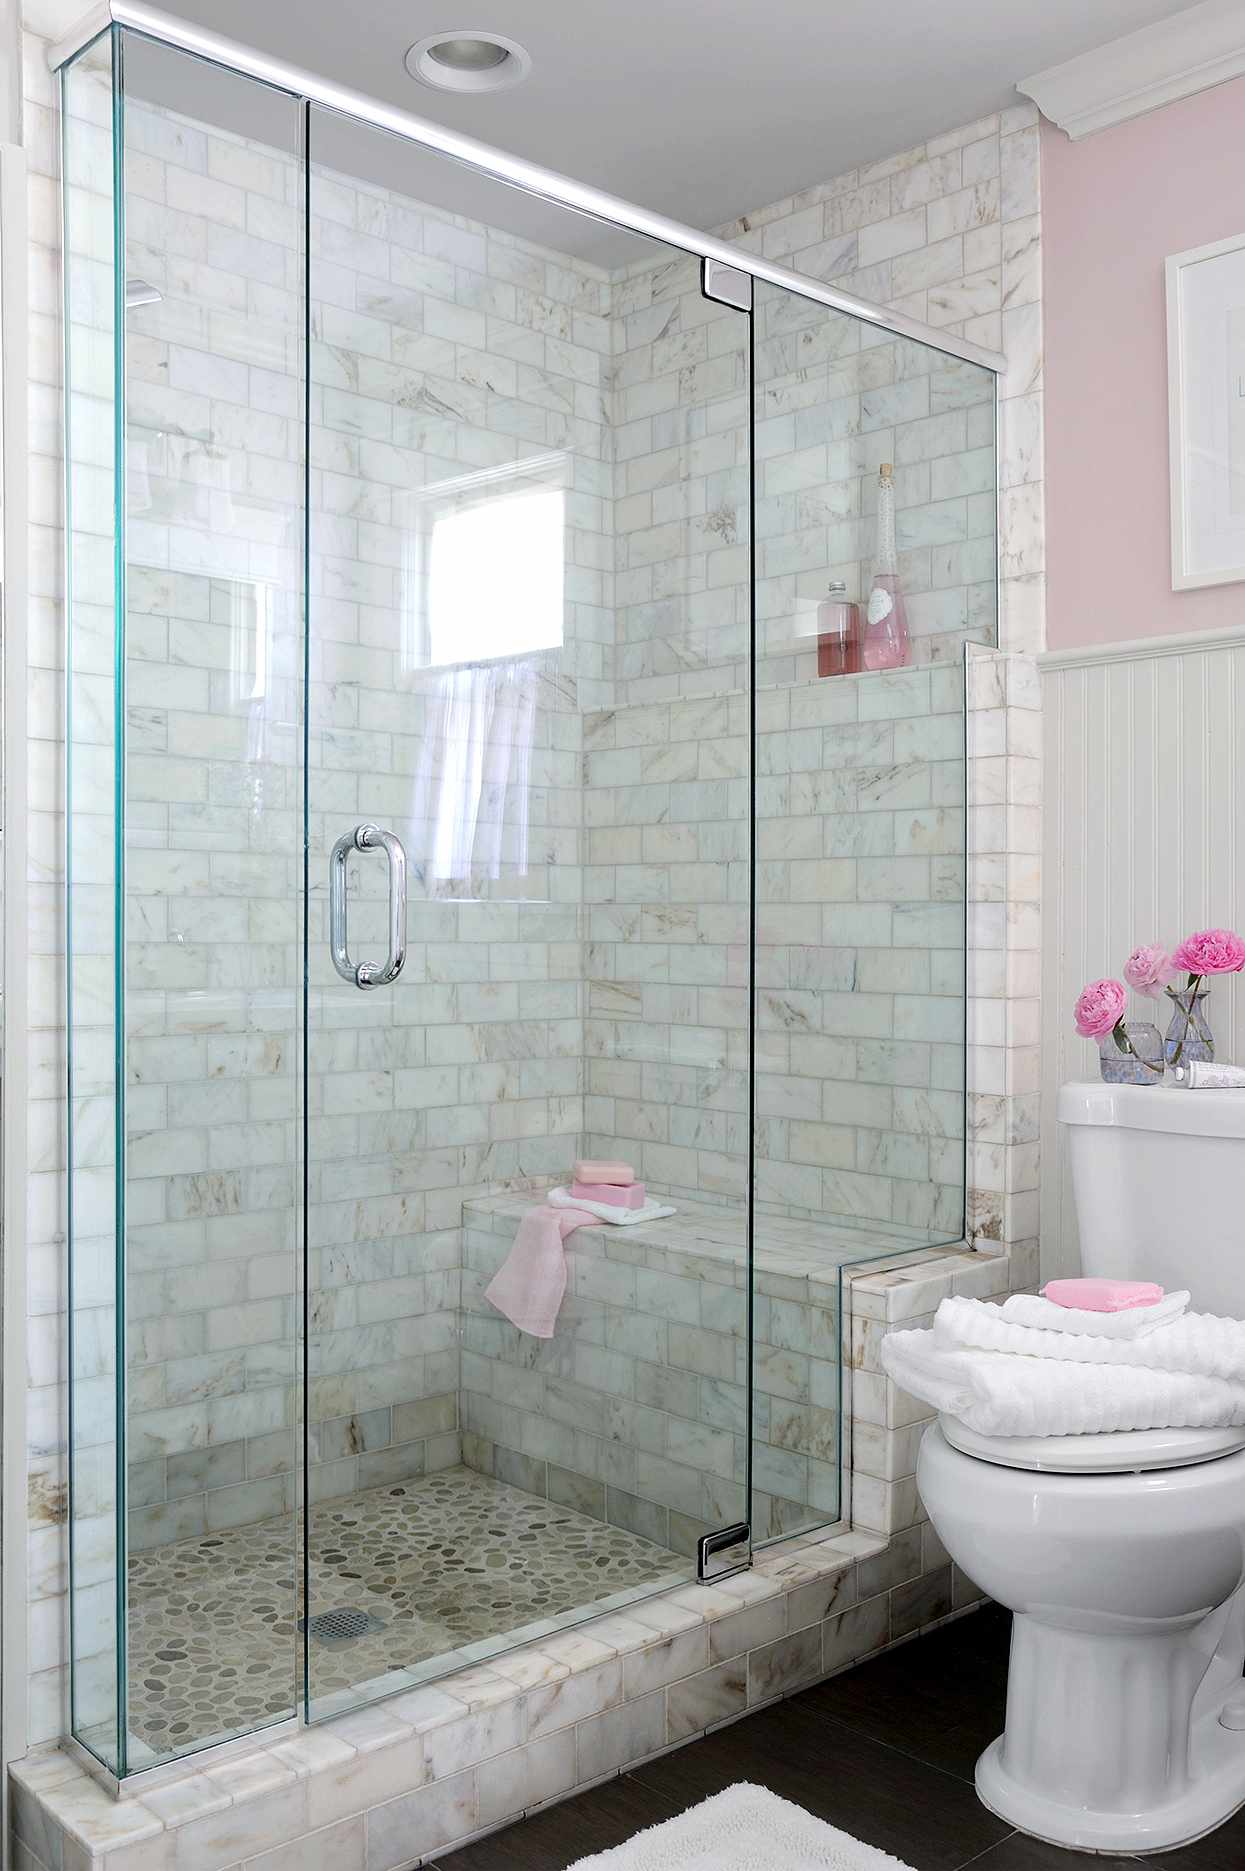 20 Stunning Walk In Shower Ideas For Small Bathrooms Better Homes Gardens